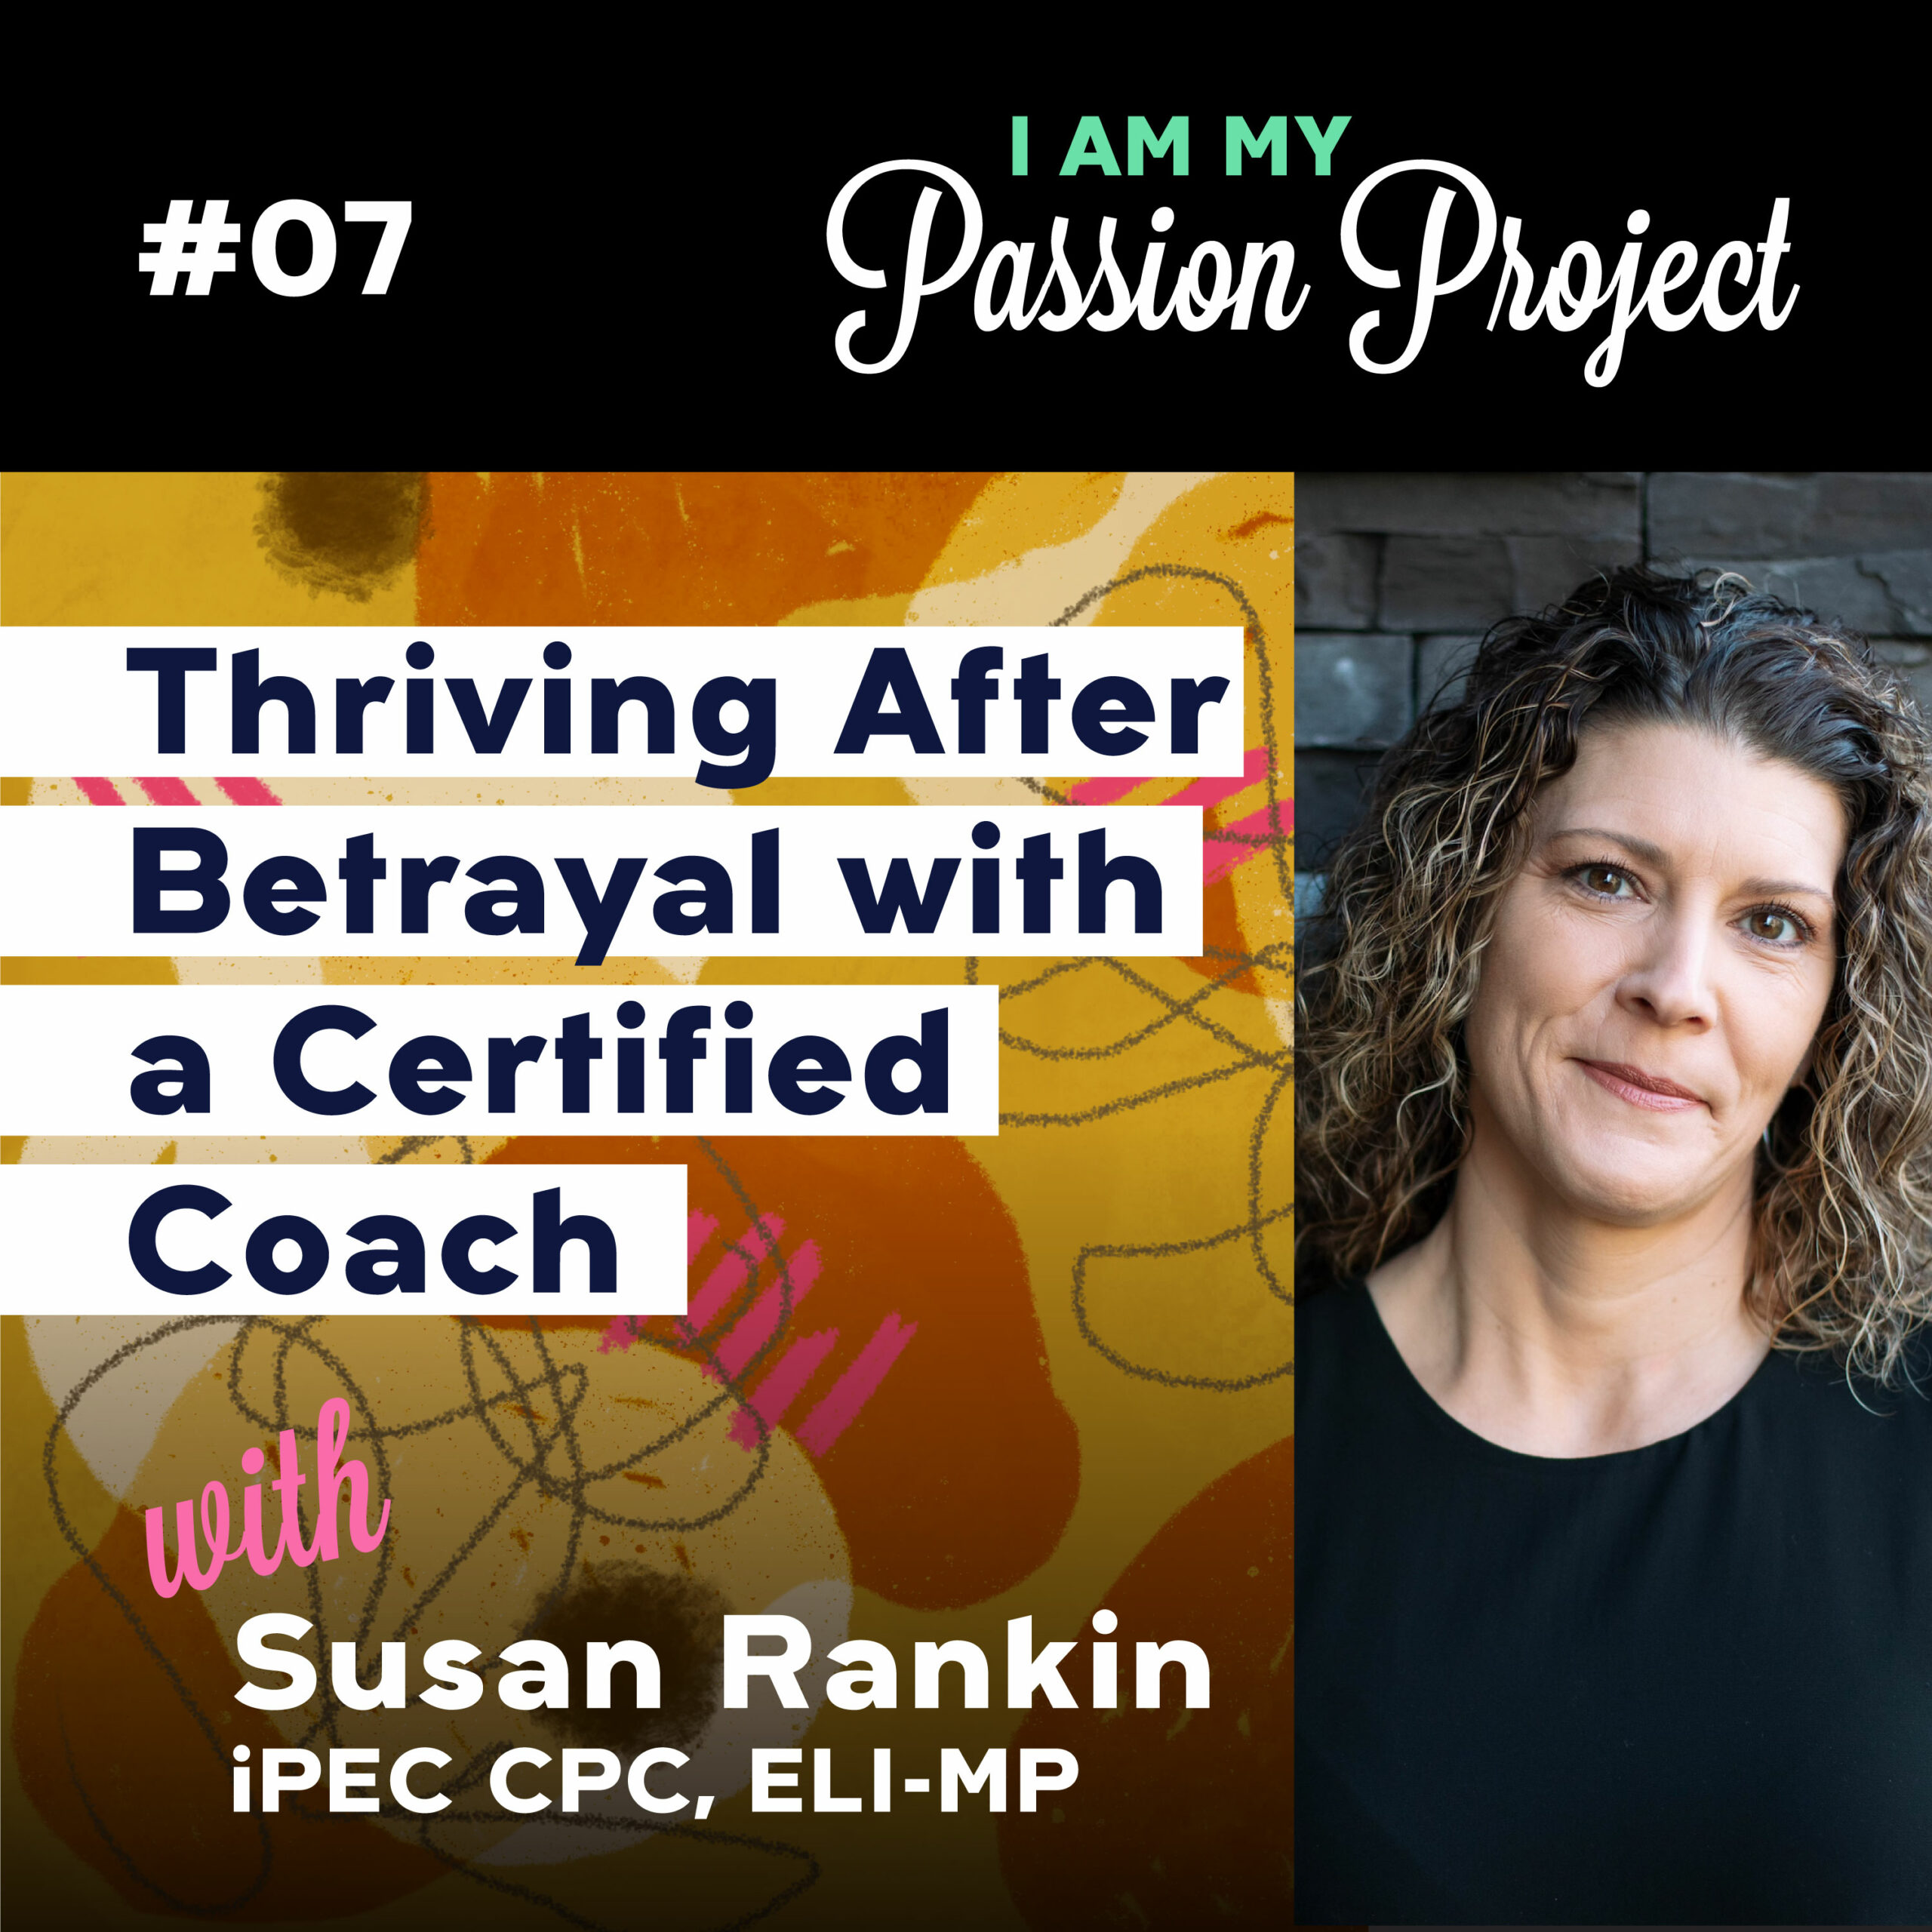 Thriving After Betrayal with a Certified Coach, with Susan Rankin